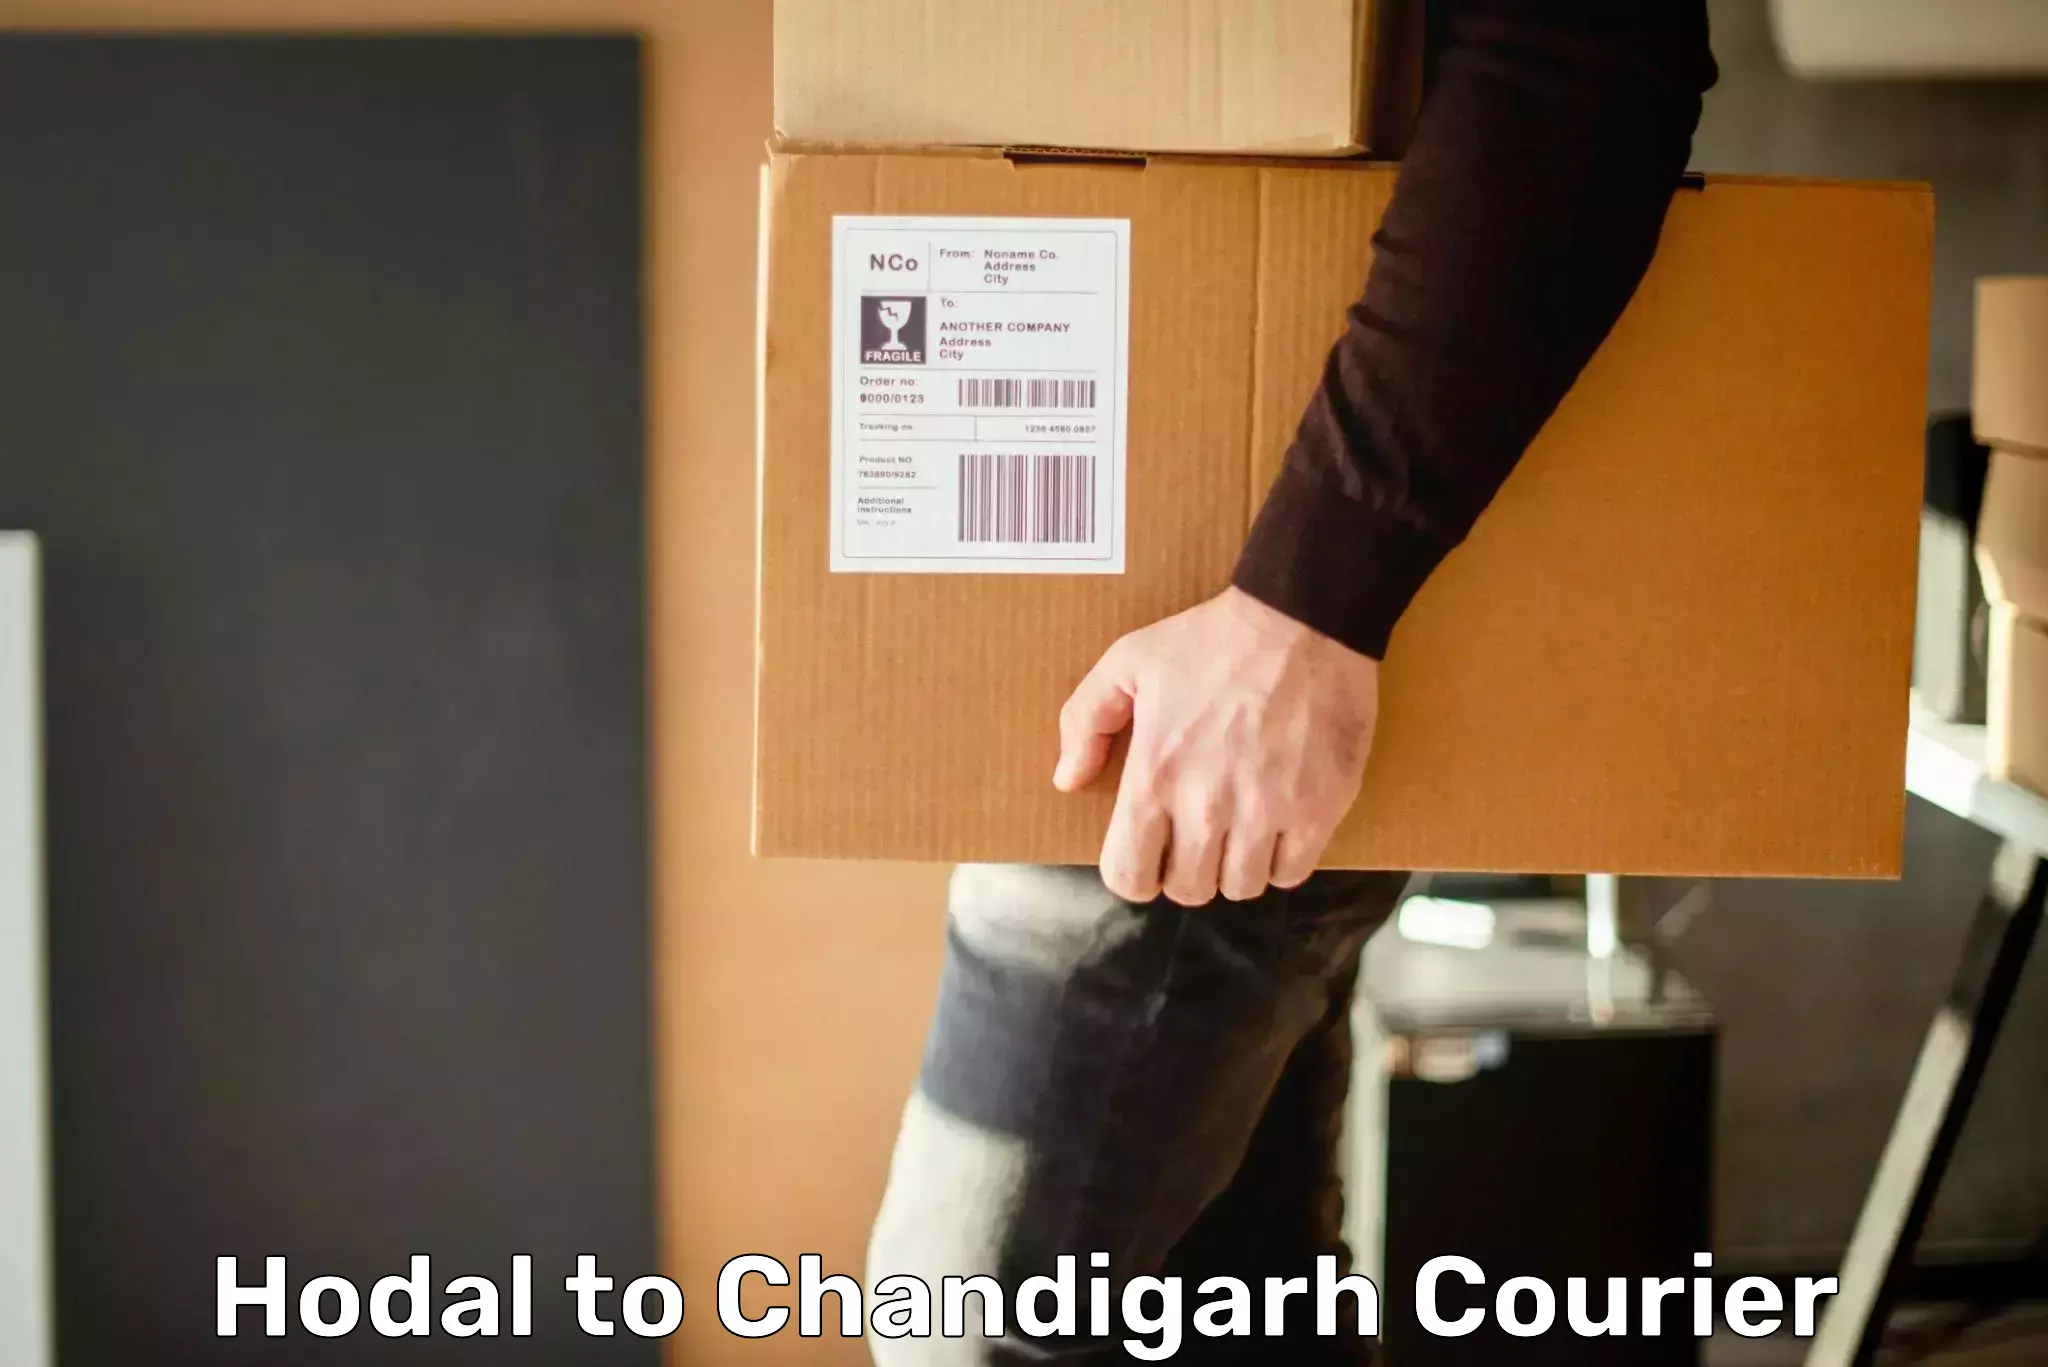 Online shipping calculator Hodal to Chandigarh